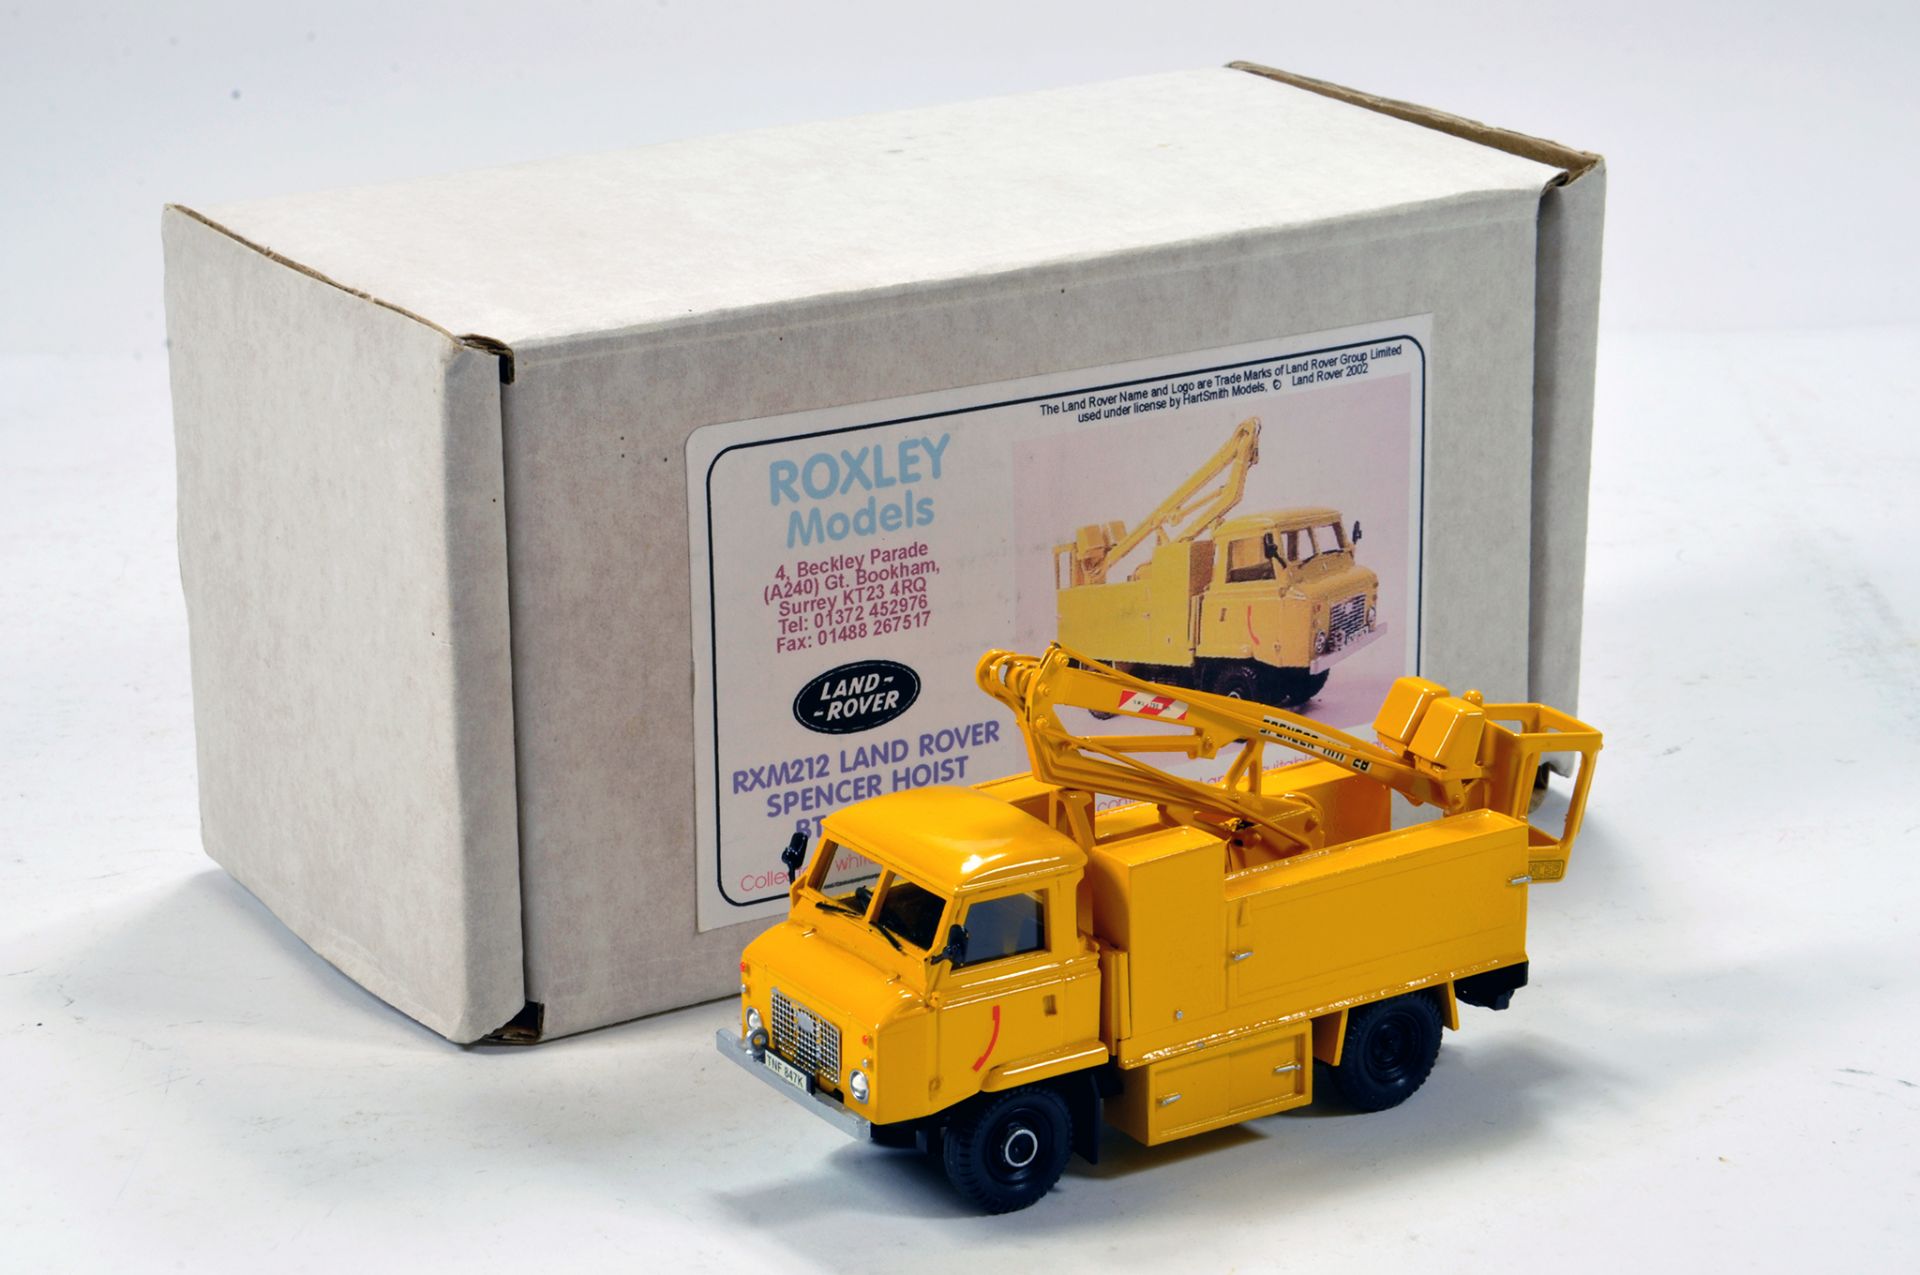 Roxley Models by Hart 1/48 RXM212 Land Rover Spencer Hoist in livery of BT. Superb hand built